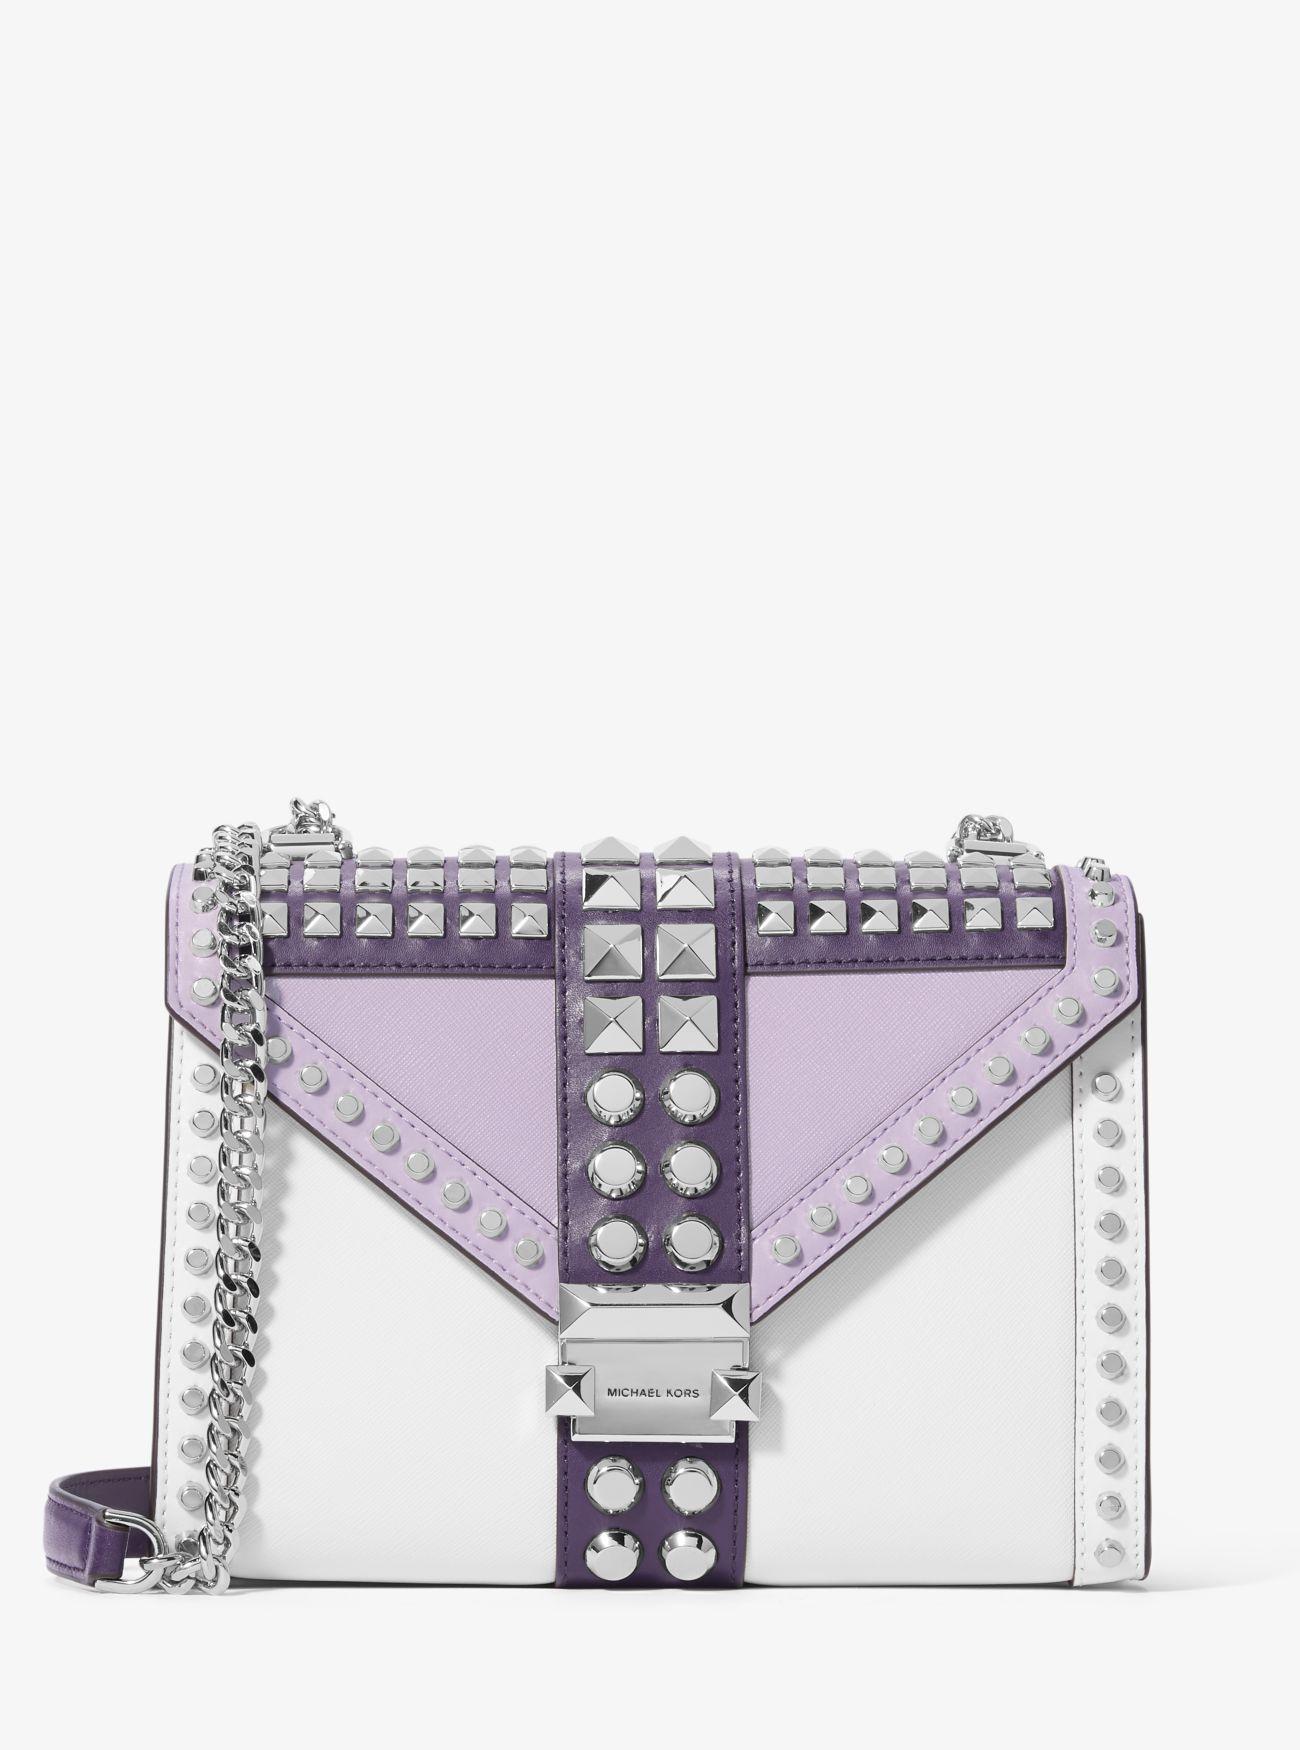 Michael Kors Whitney Large Studded Tri-color Saffiano Leather Convertible Shoulder Bag in Purple ...